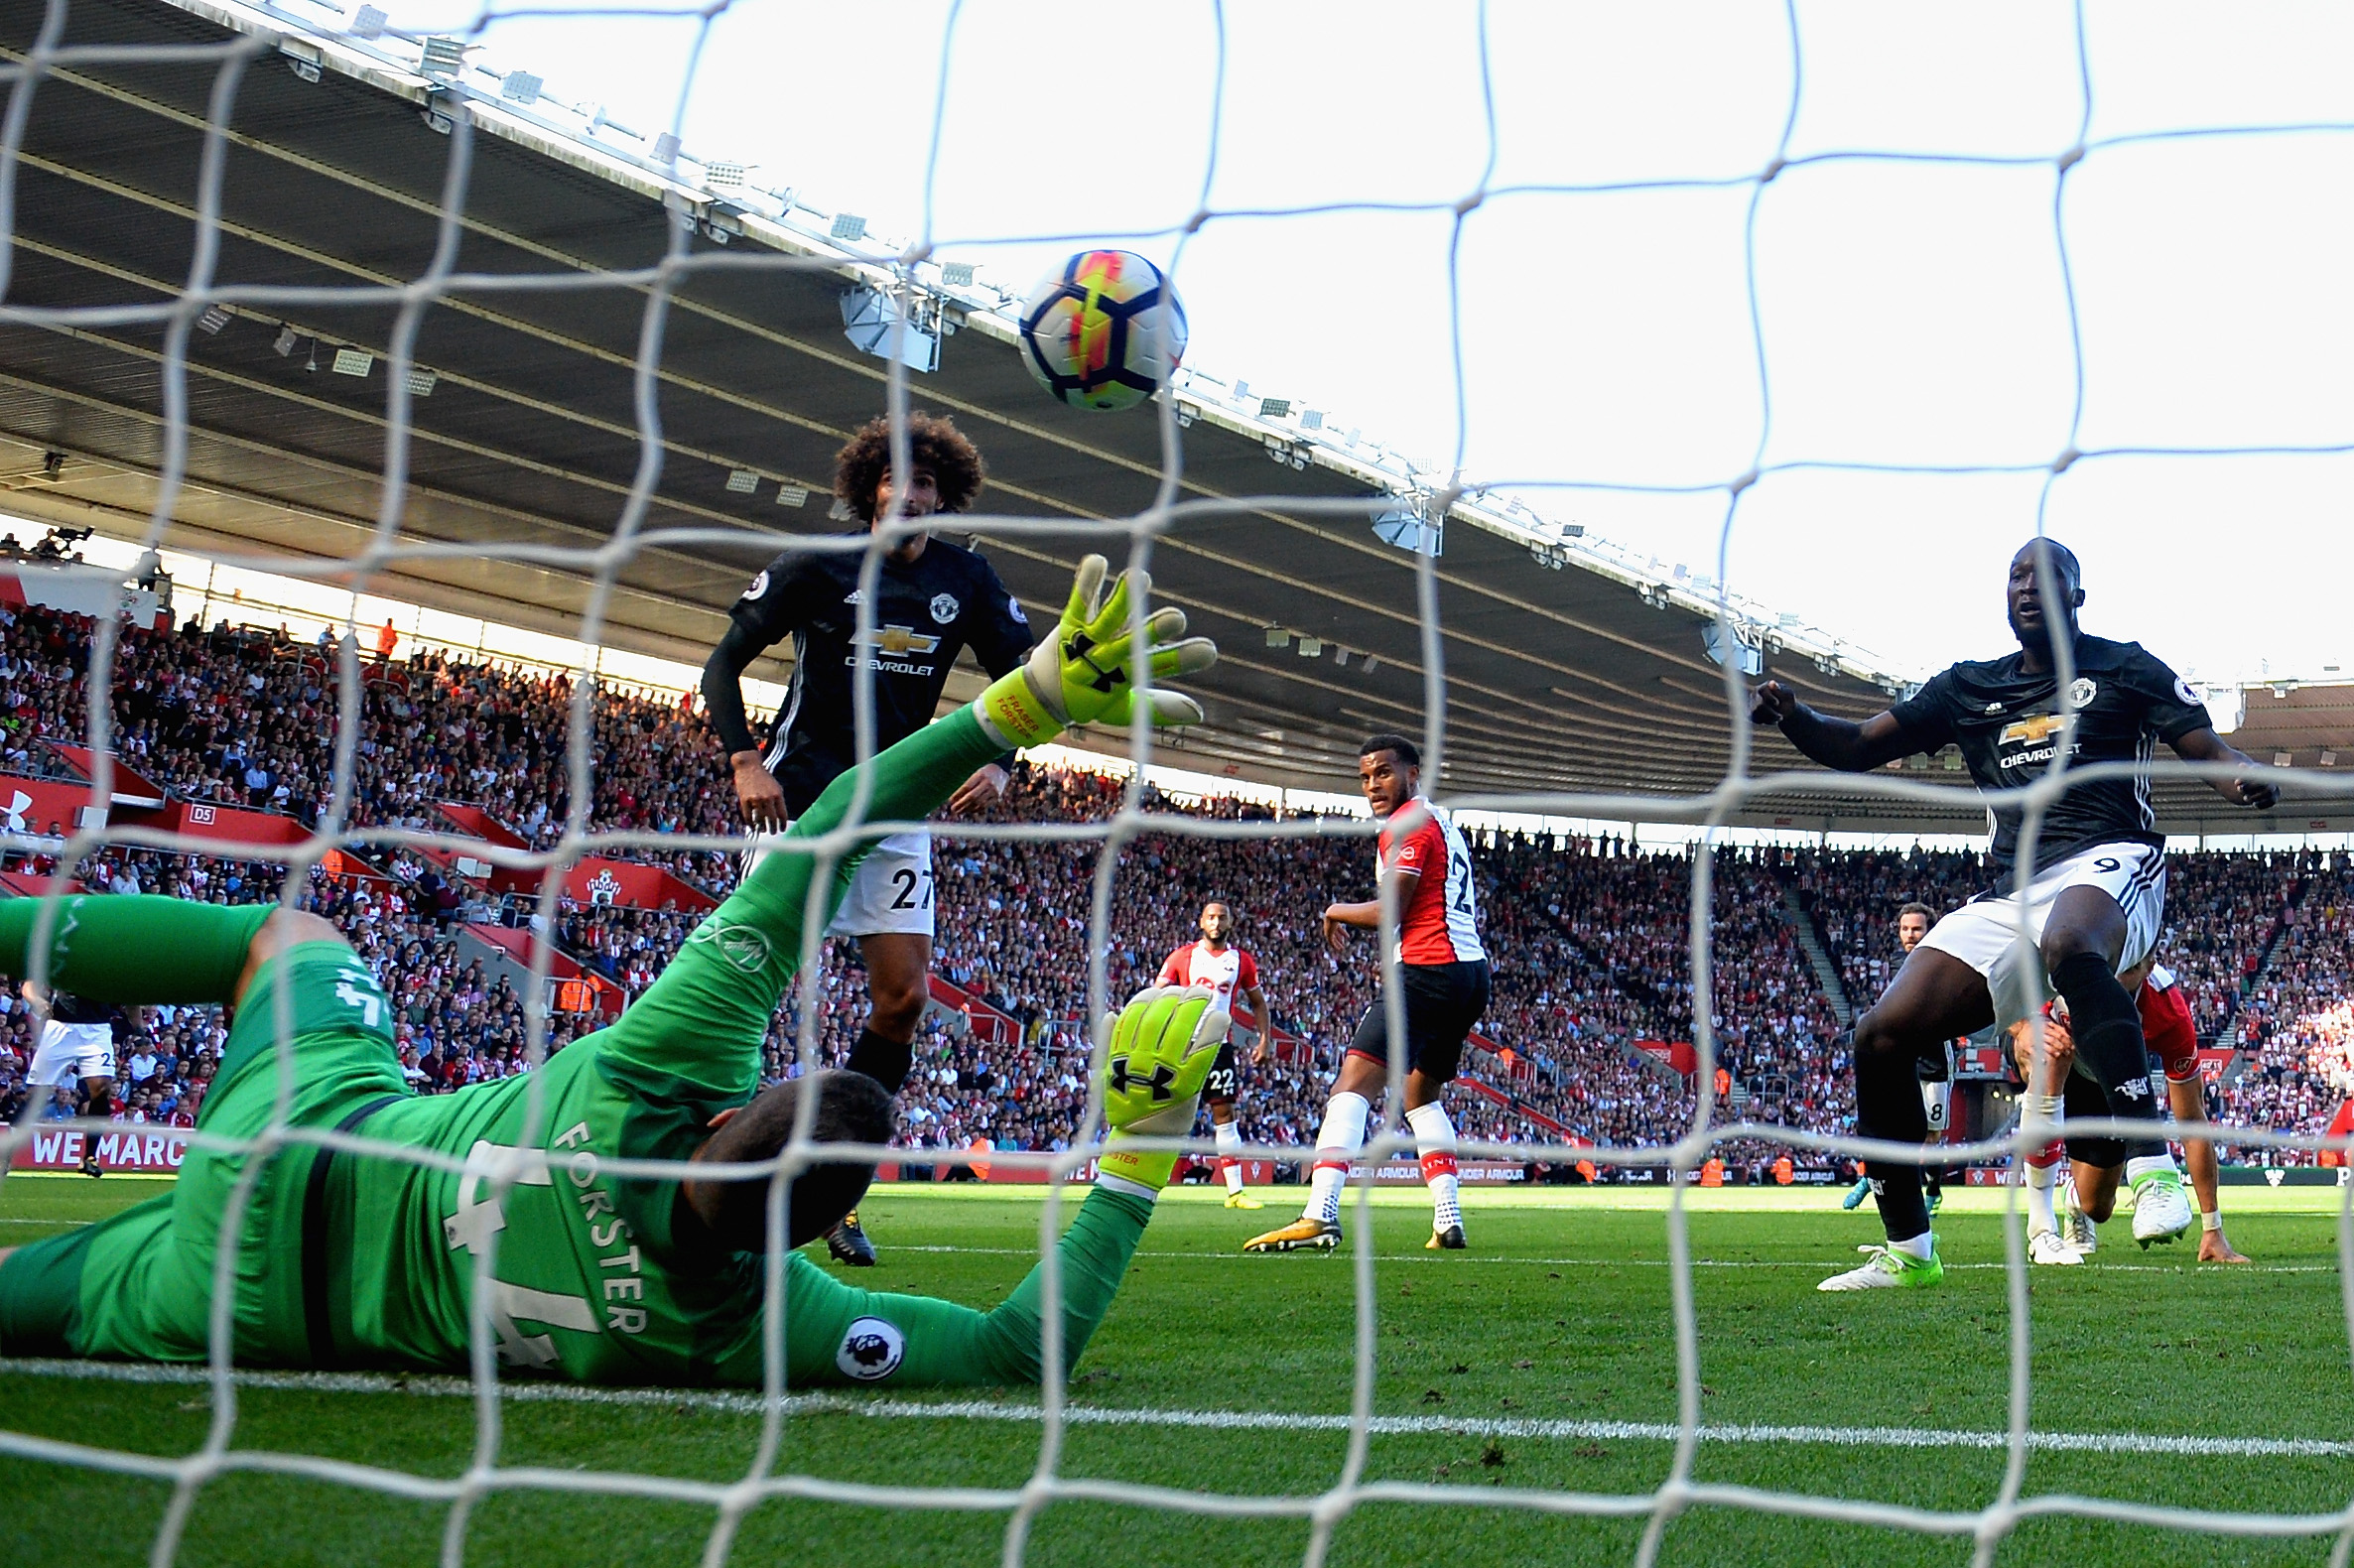 SOUTHAMPTON, ENGLAND - SEPTEMBER 23:  Romelu Lukaku of Manchester United scores his sides first goal past Fraser Forster of Southampton during the Premier League match between Southampton and Manchester United at St Mary's Stadium on September 23, 2017 in Southampton, England.  (Photo by Dan Mullan/Getty Images)